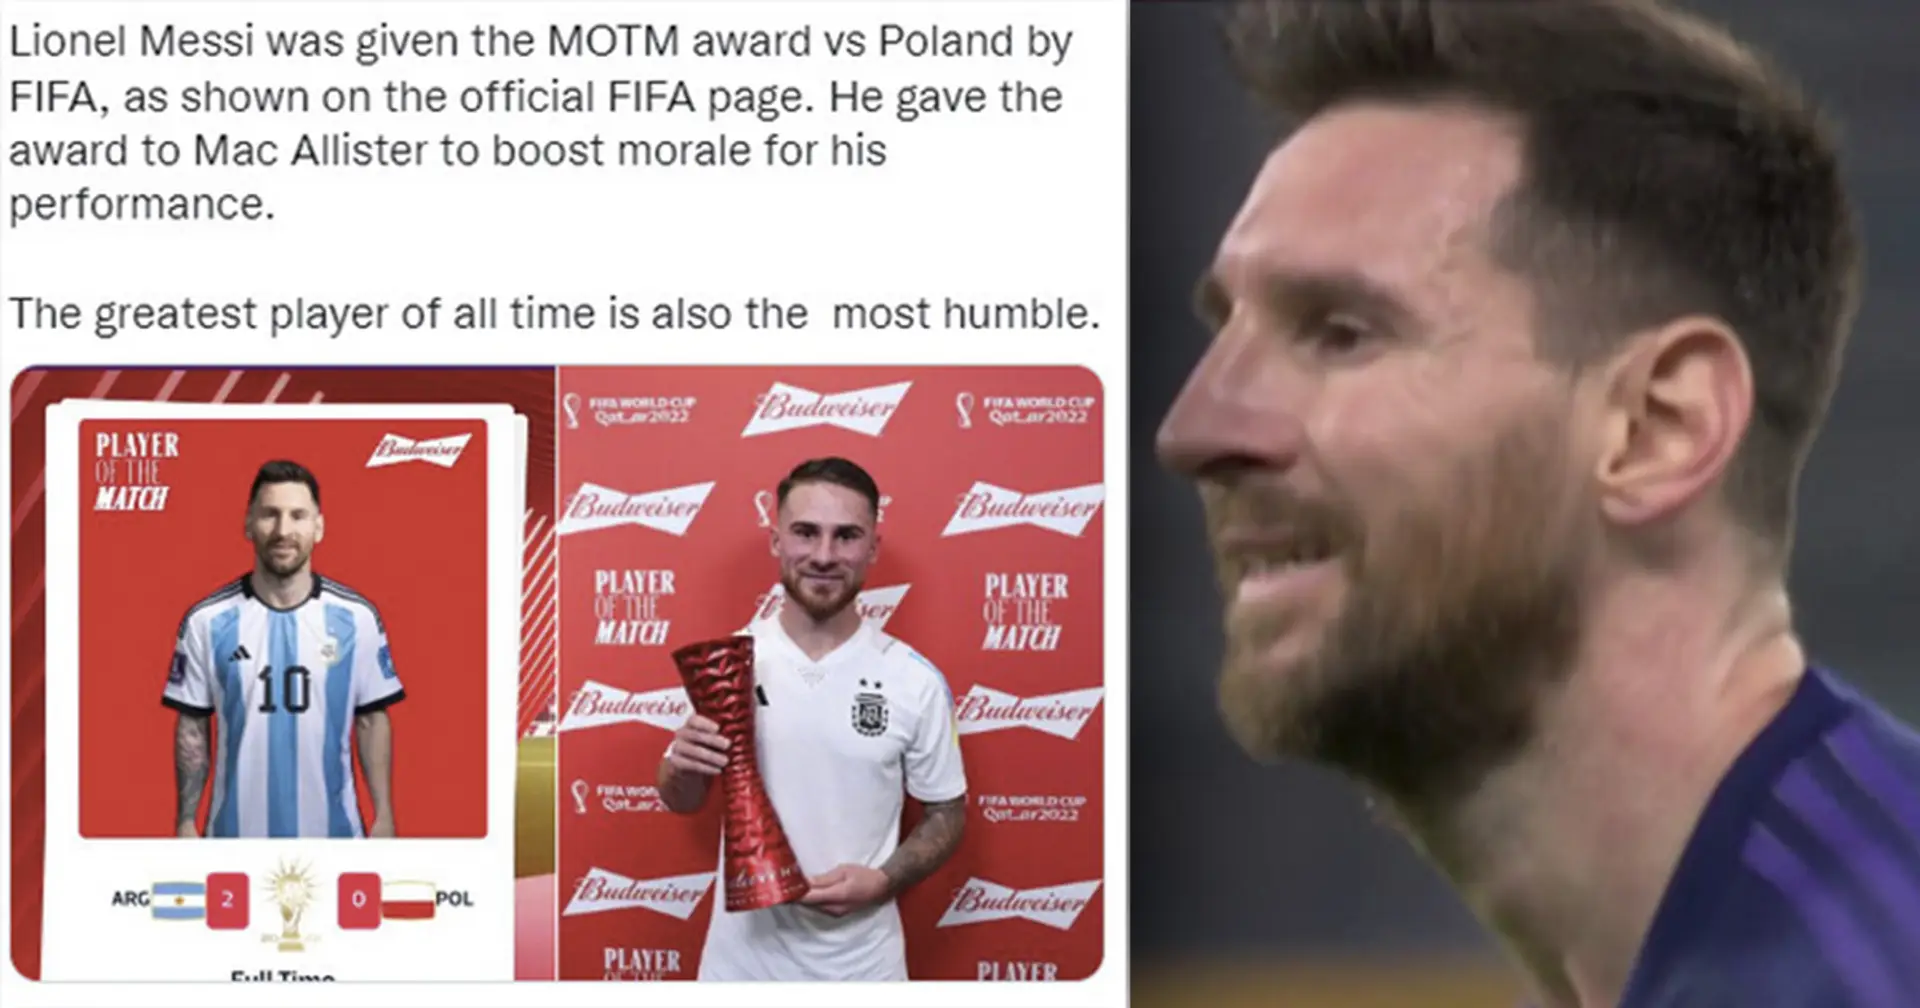 Did Messi really give his Man of the Match award to teammate after Poland win? Explained